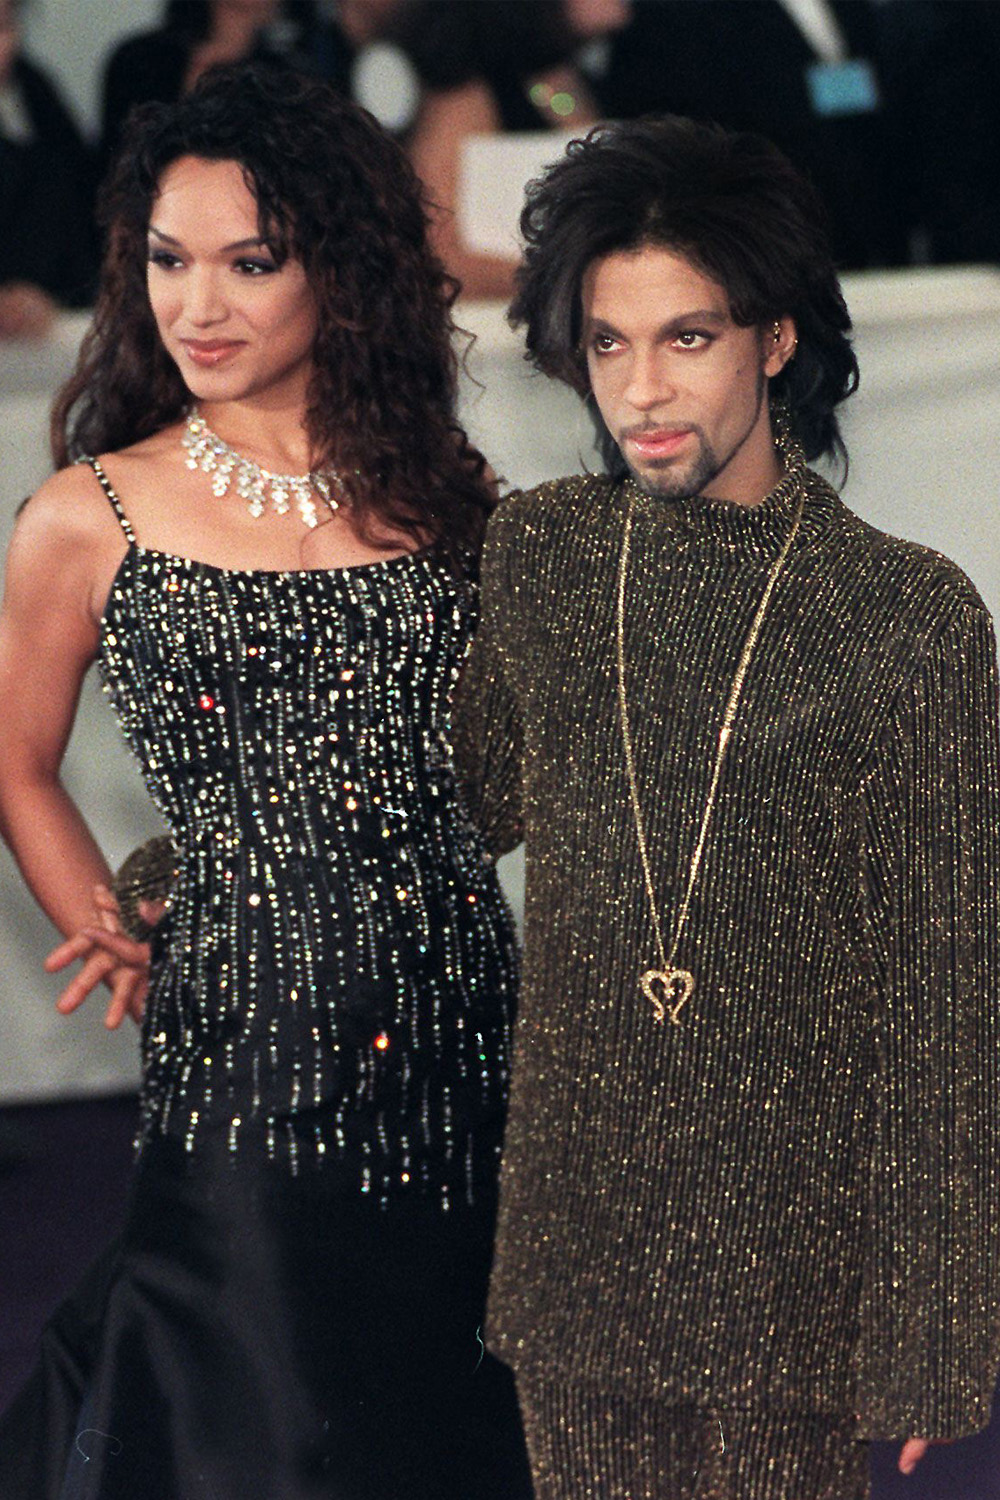 Mayte Garcia was a back-up singer for Prince and his first marriage, which lasted from 1996 to 1999.